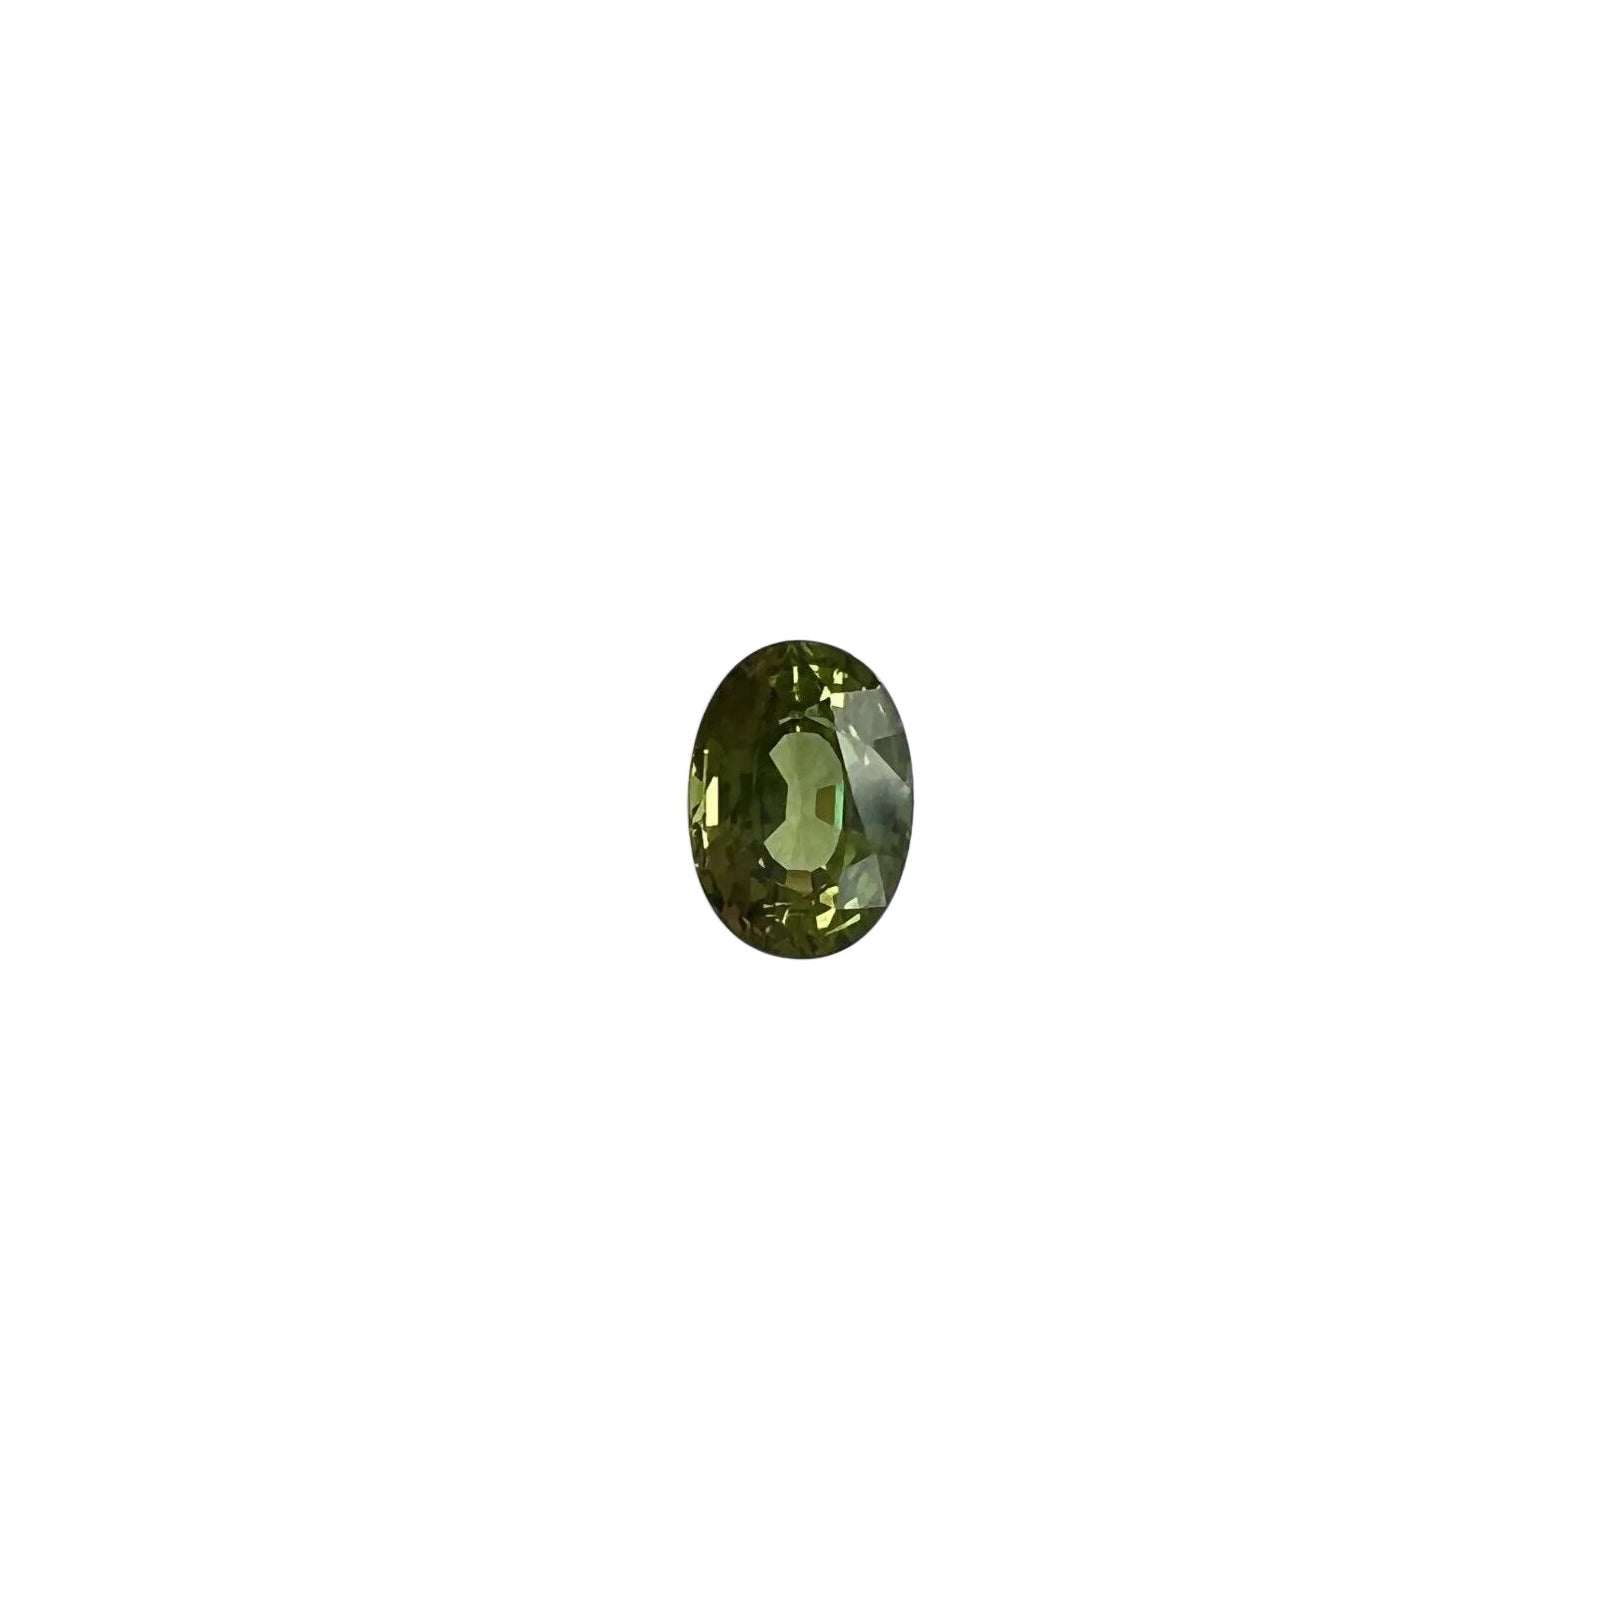 1.05ct Vivid Green Oval Cut Sapphire Untreated Rare IGI Certified Blister